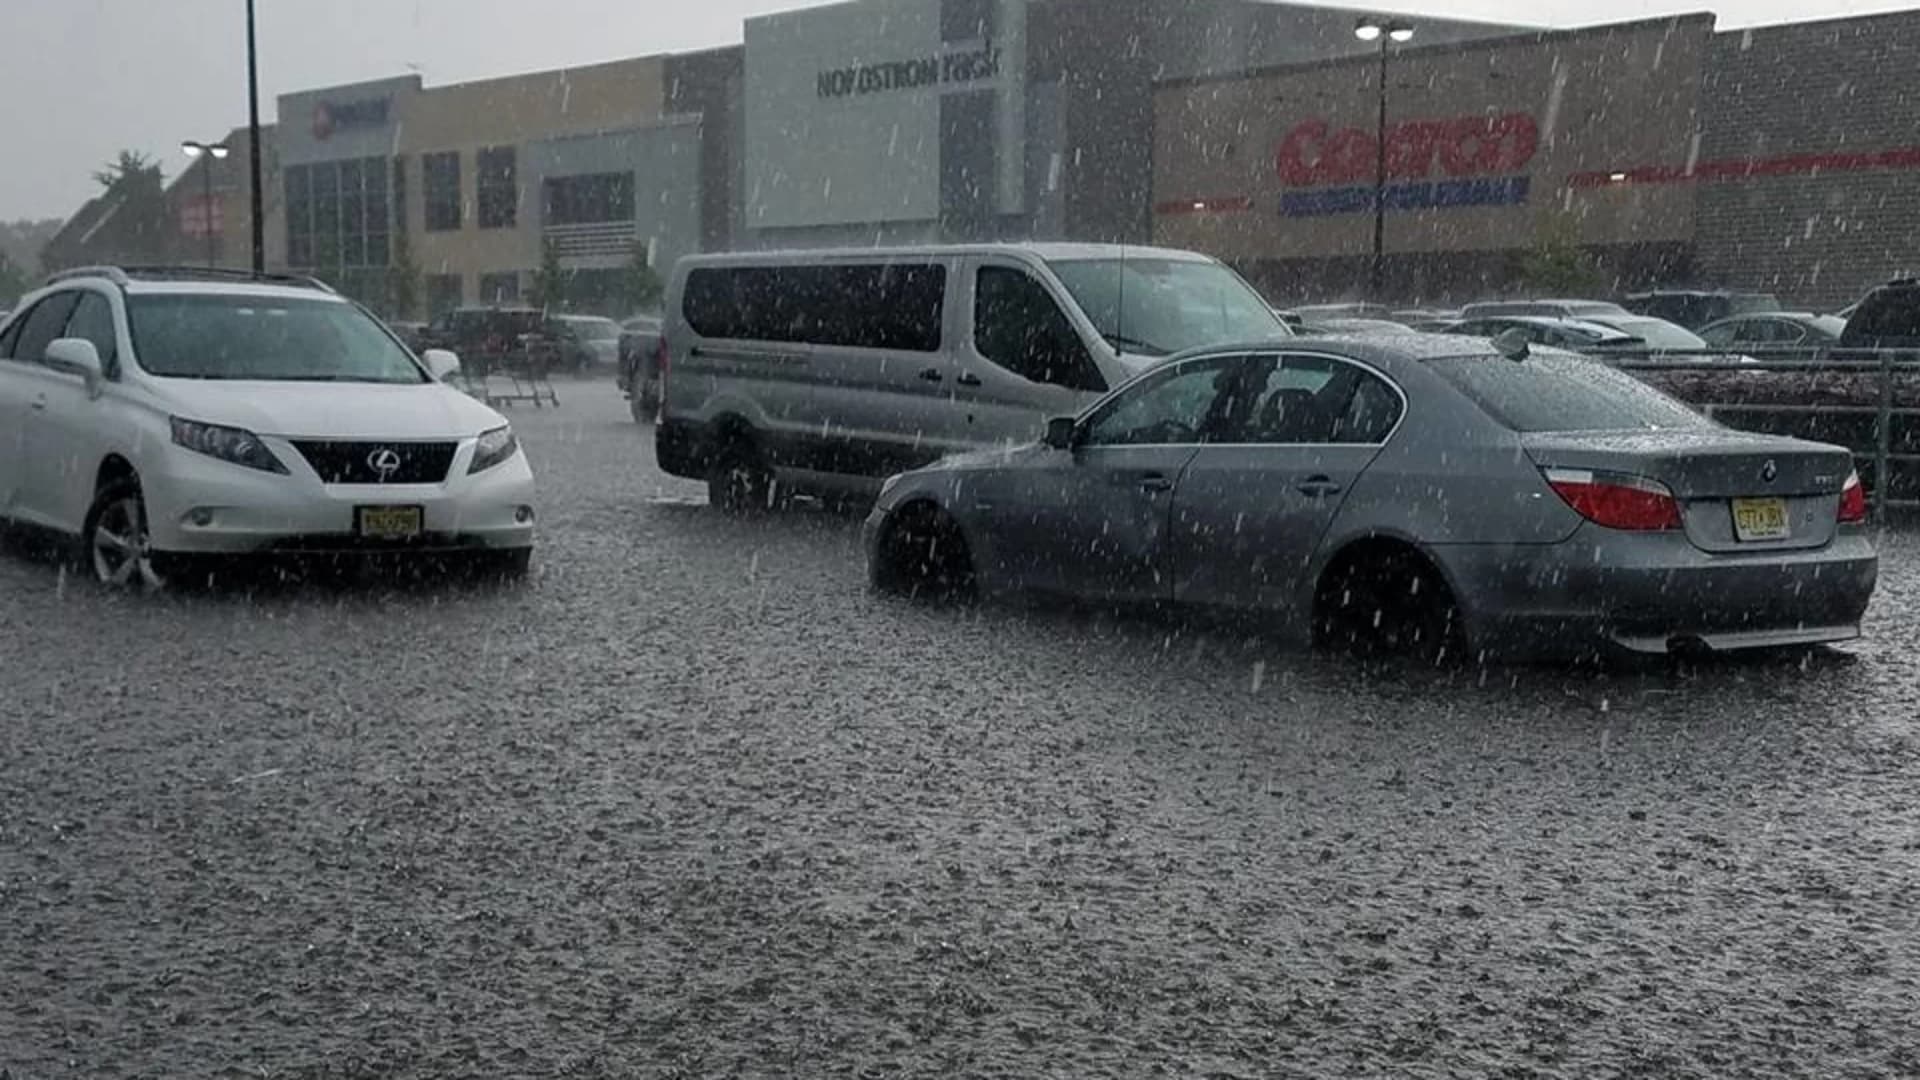 Photos: Severe weather in New Jersey